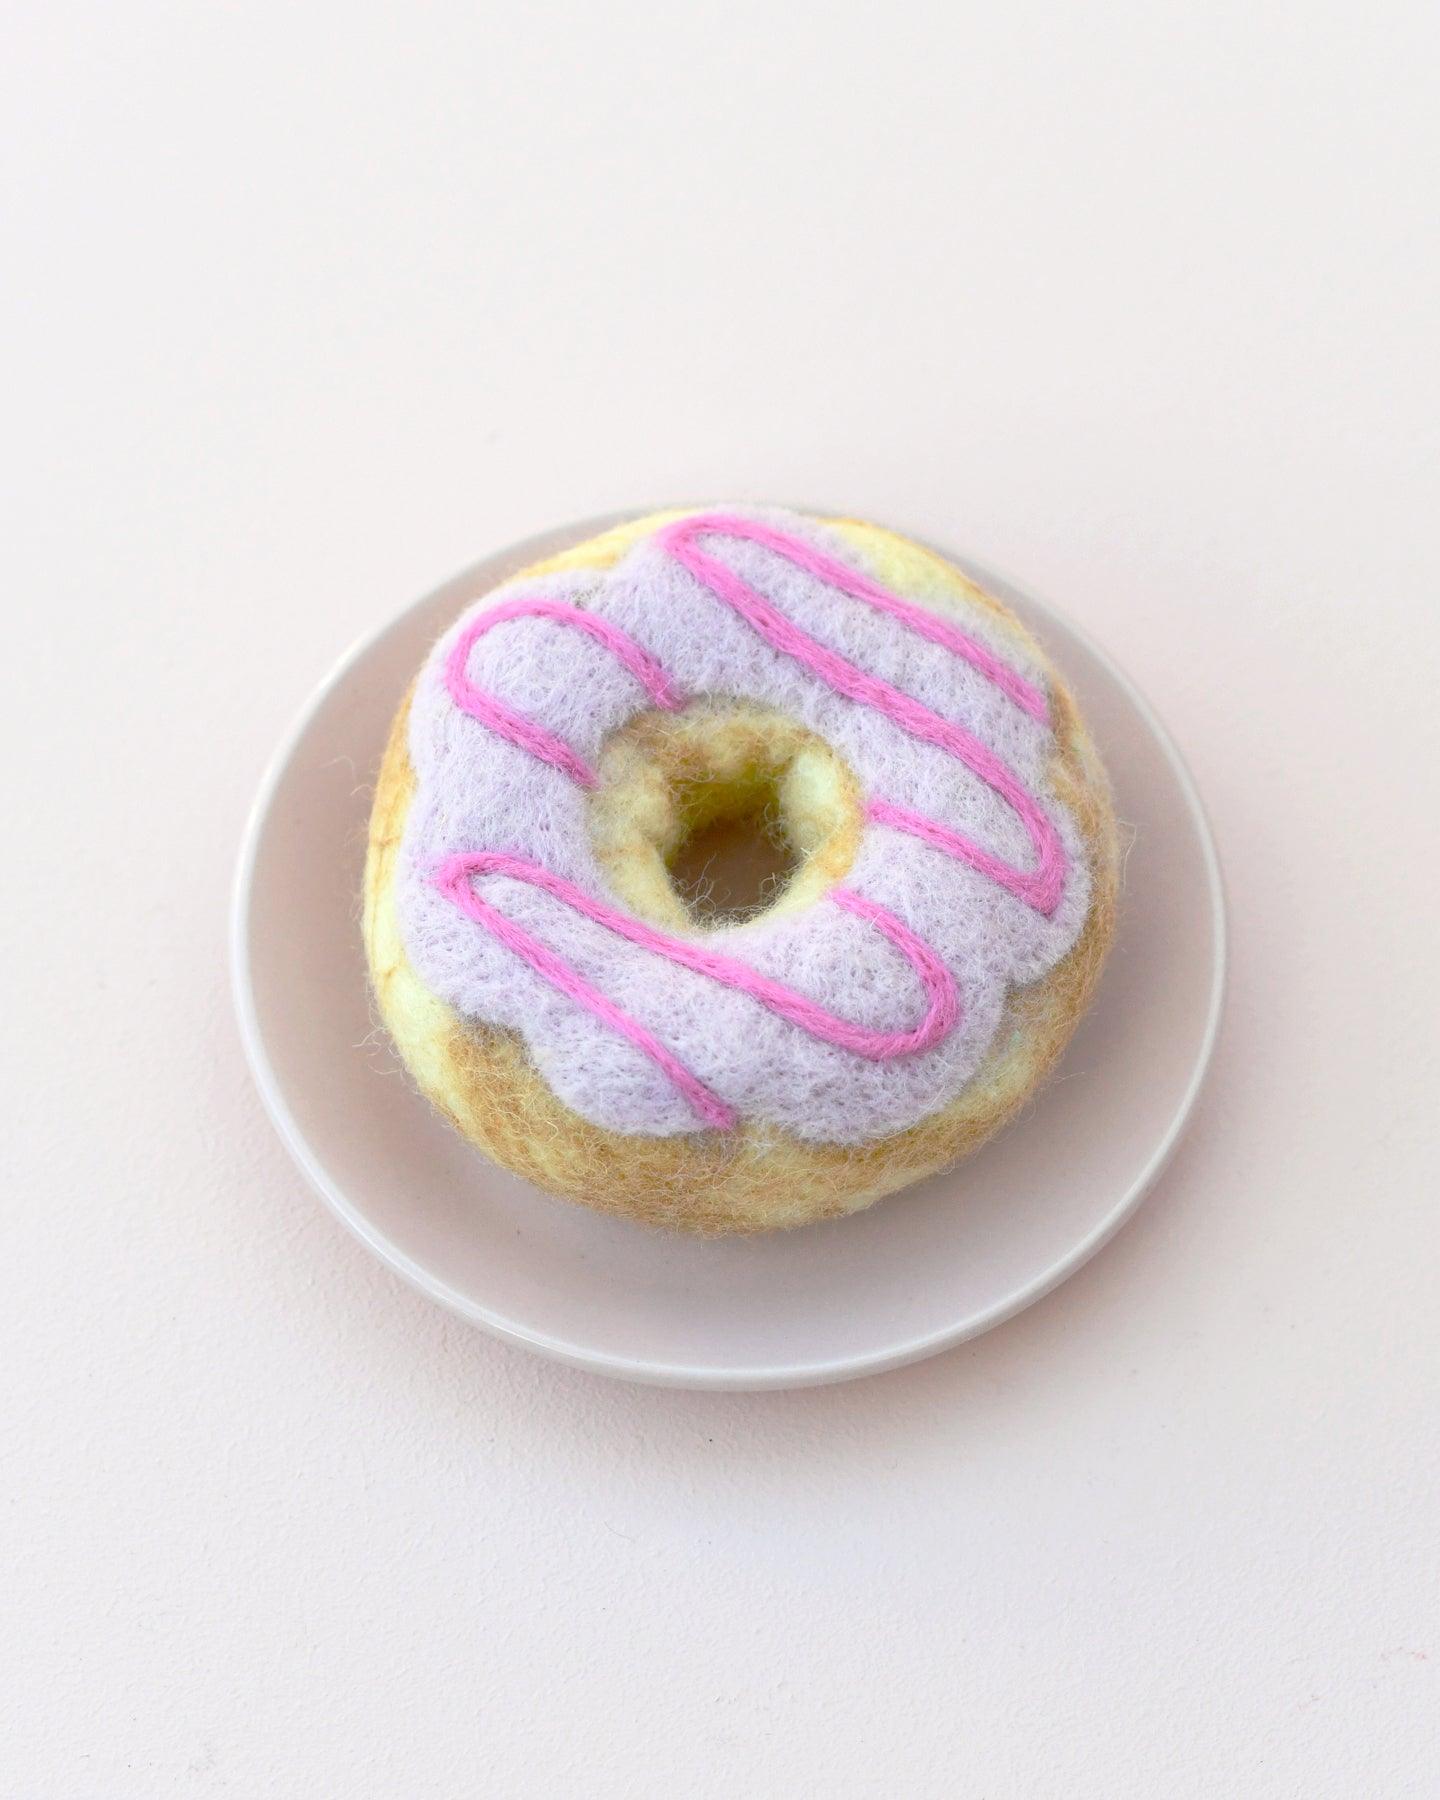 Felt Doughnut (Donut) with Pastel Frosting and Pink Drizzle - Tara Treasures